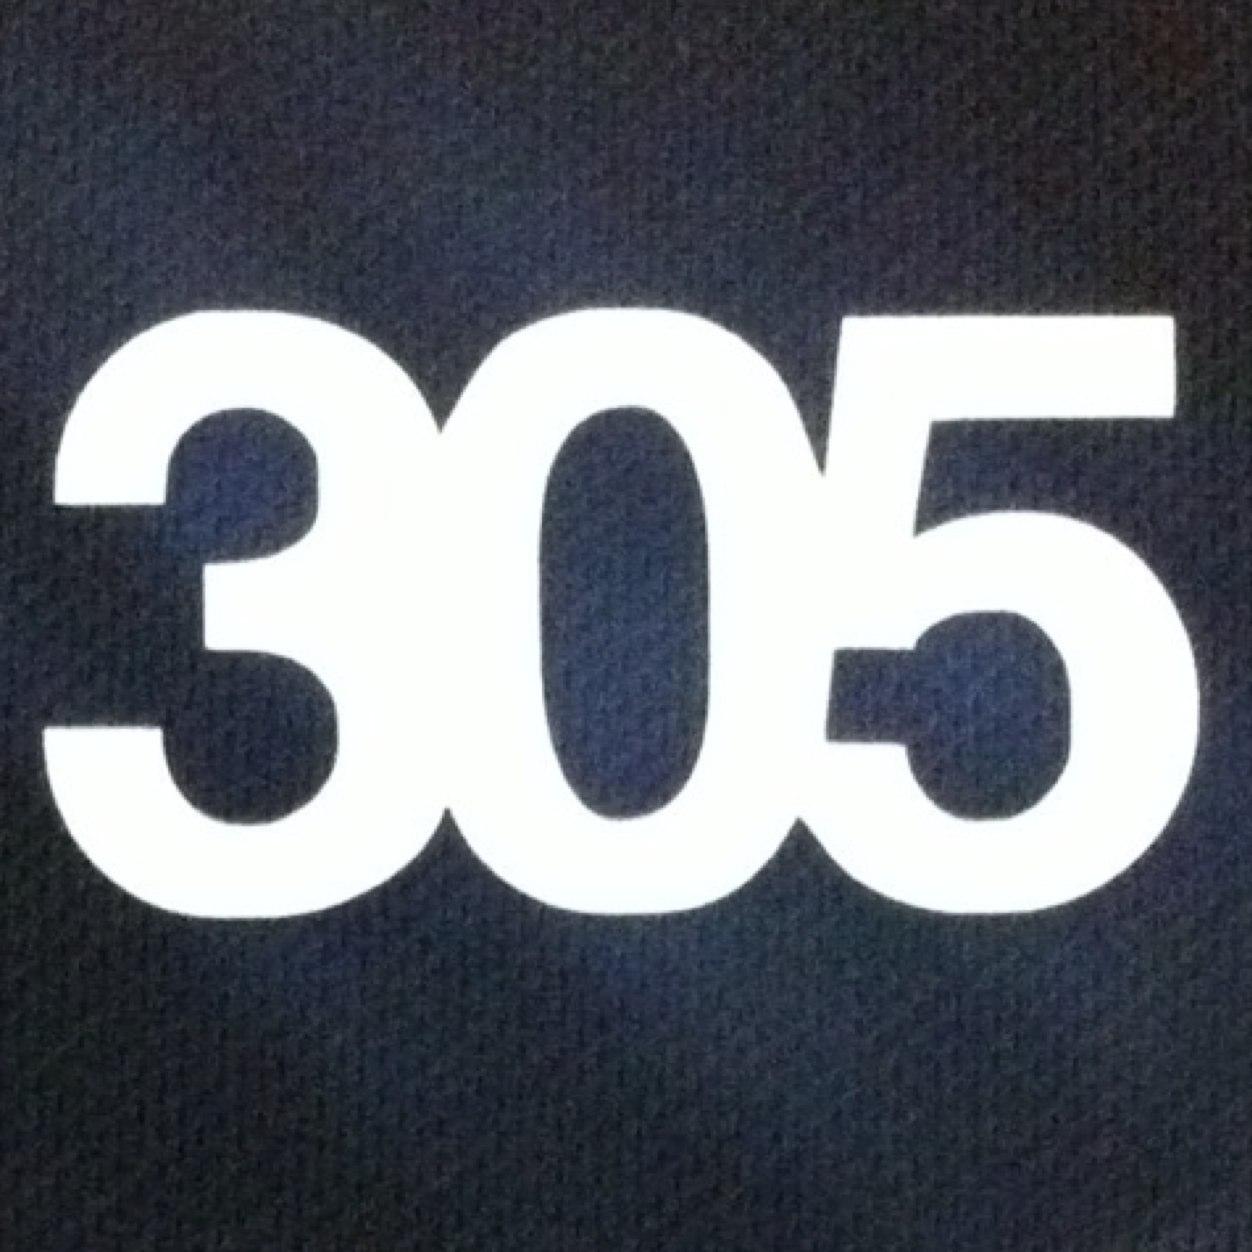 Clothing | Rackets | Luggage | Accessories - personalised clothing, Sponsoring some of the best players in the game #TEAM305